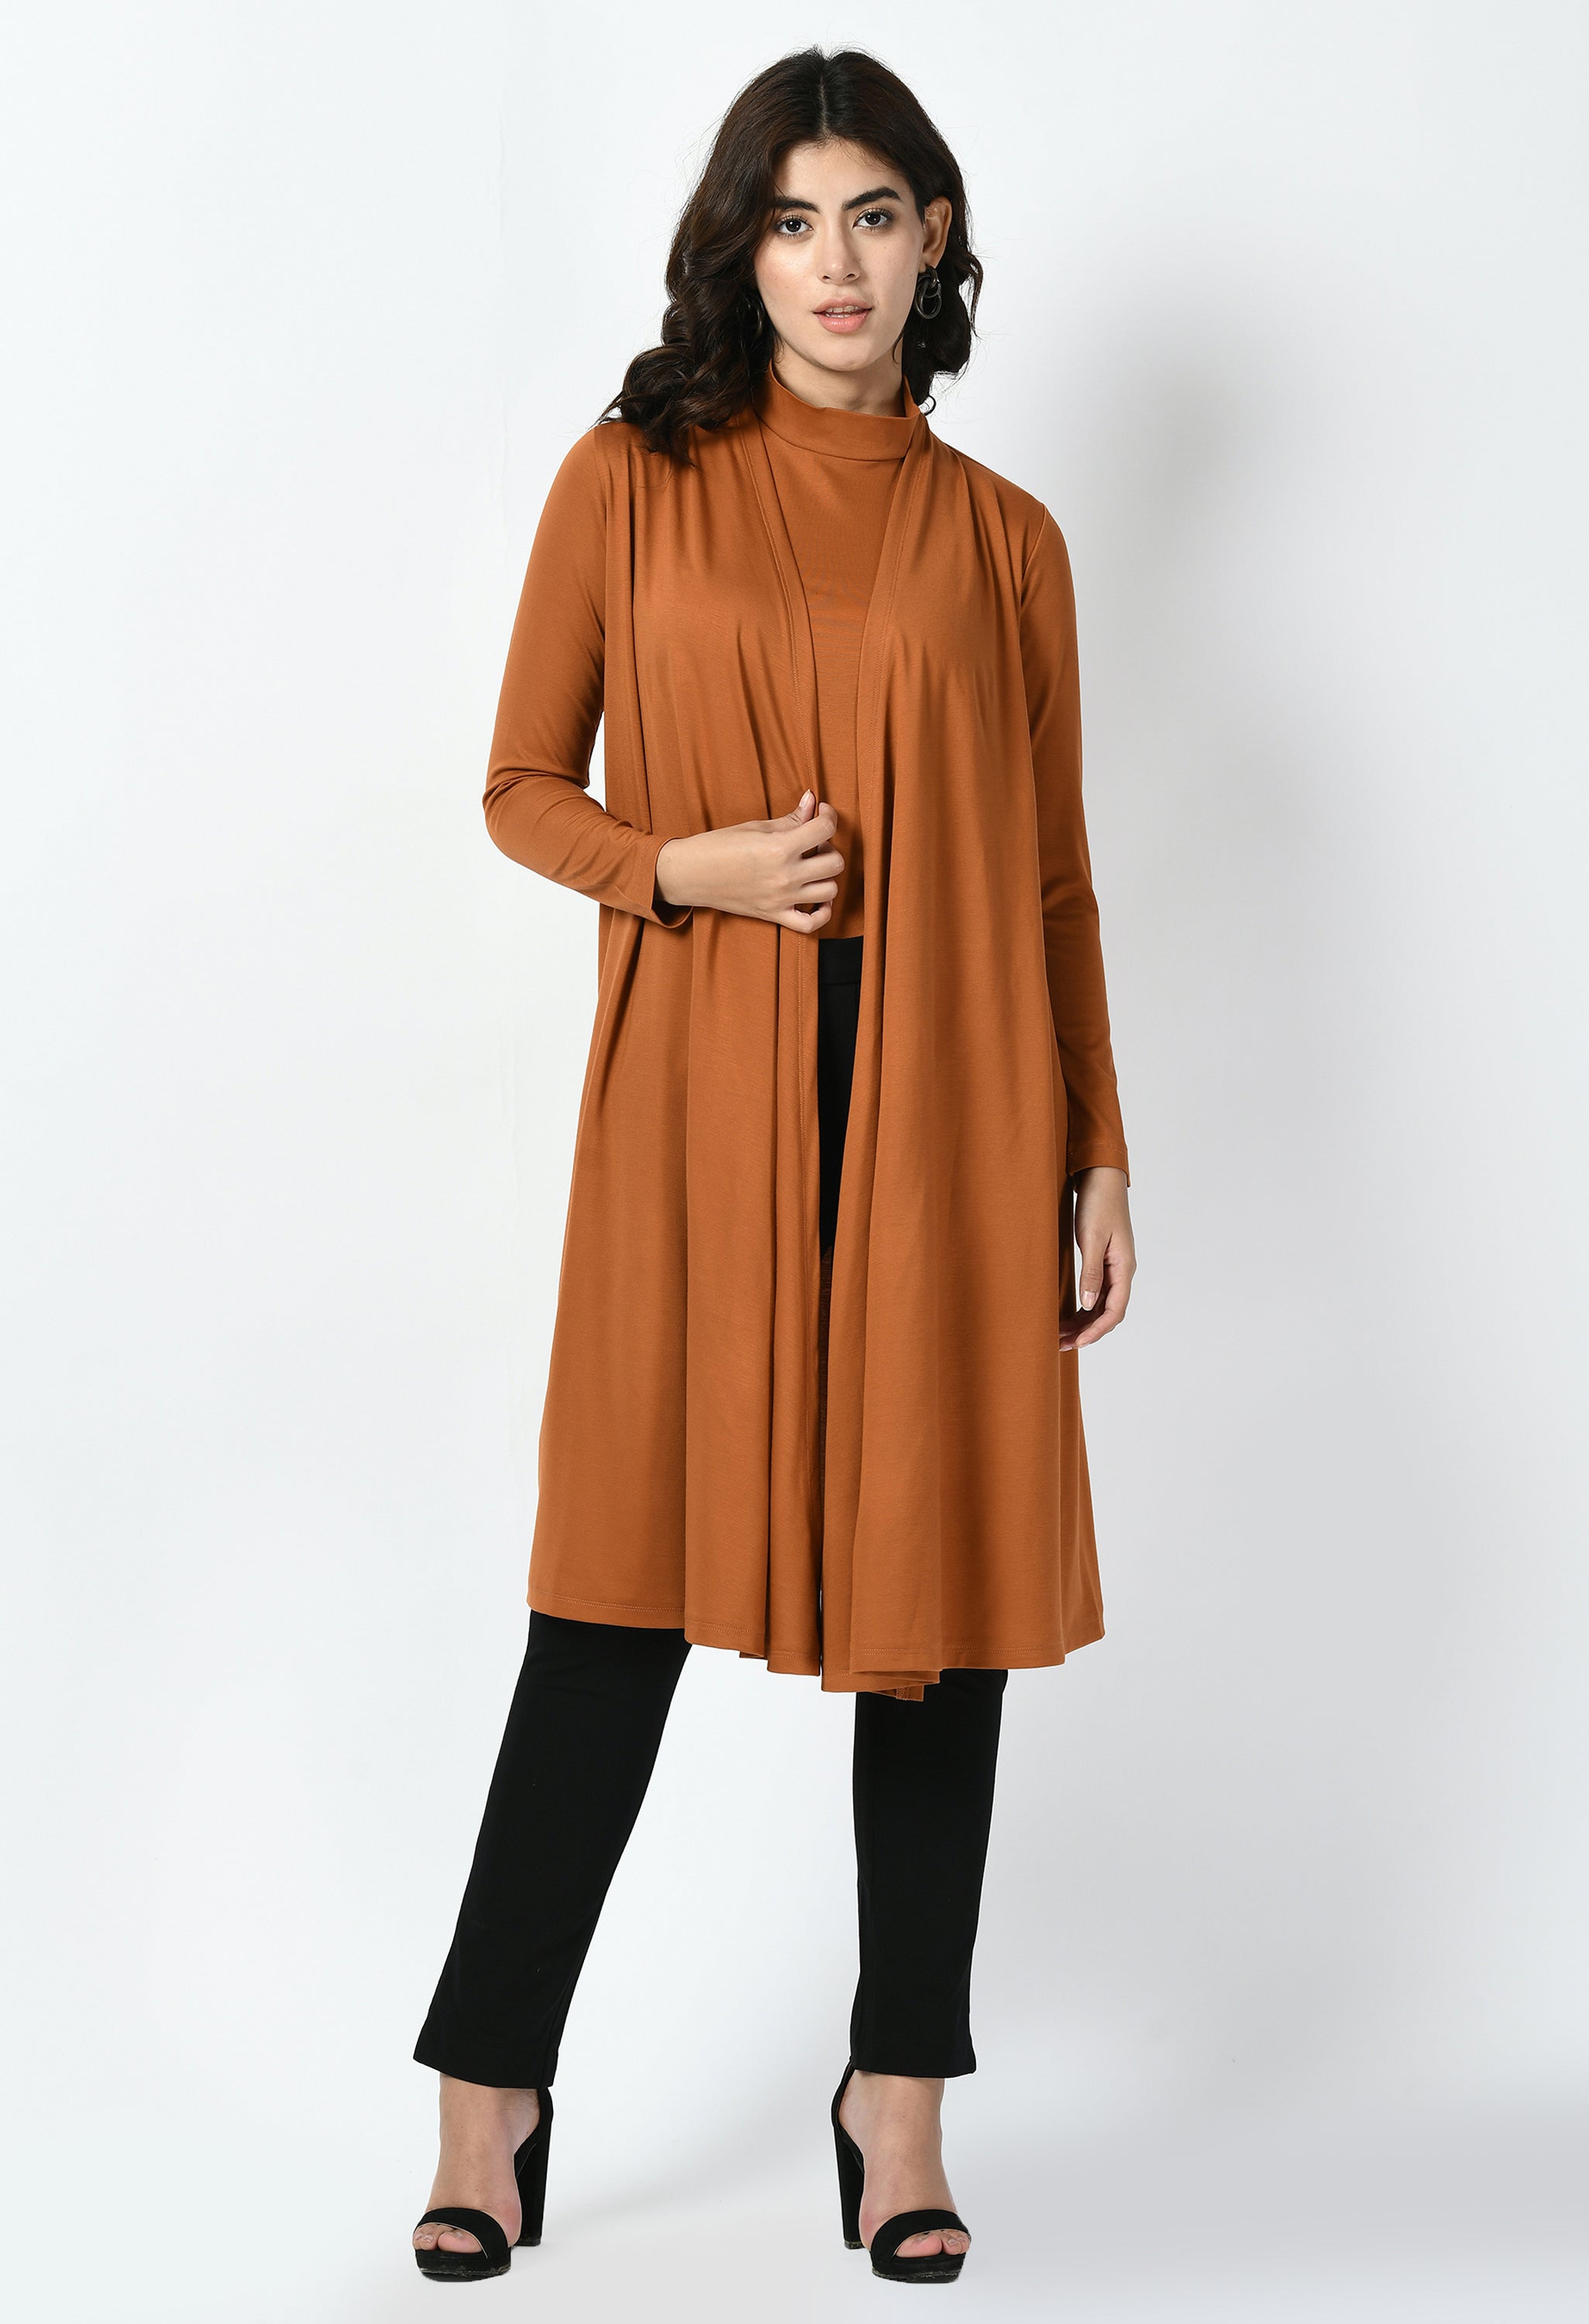 Exude Winsome High-neck T-shirt with Shrug (Tan Brown)